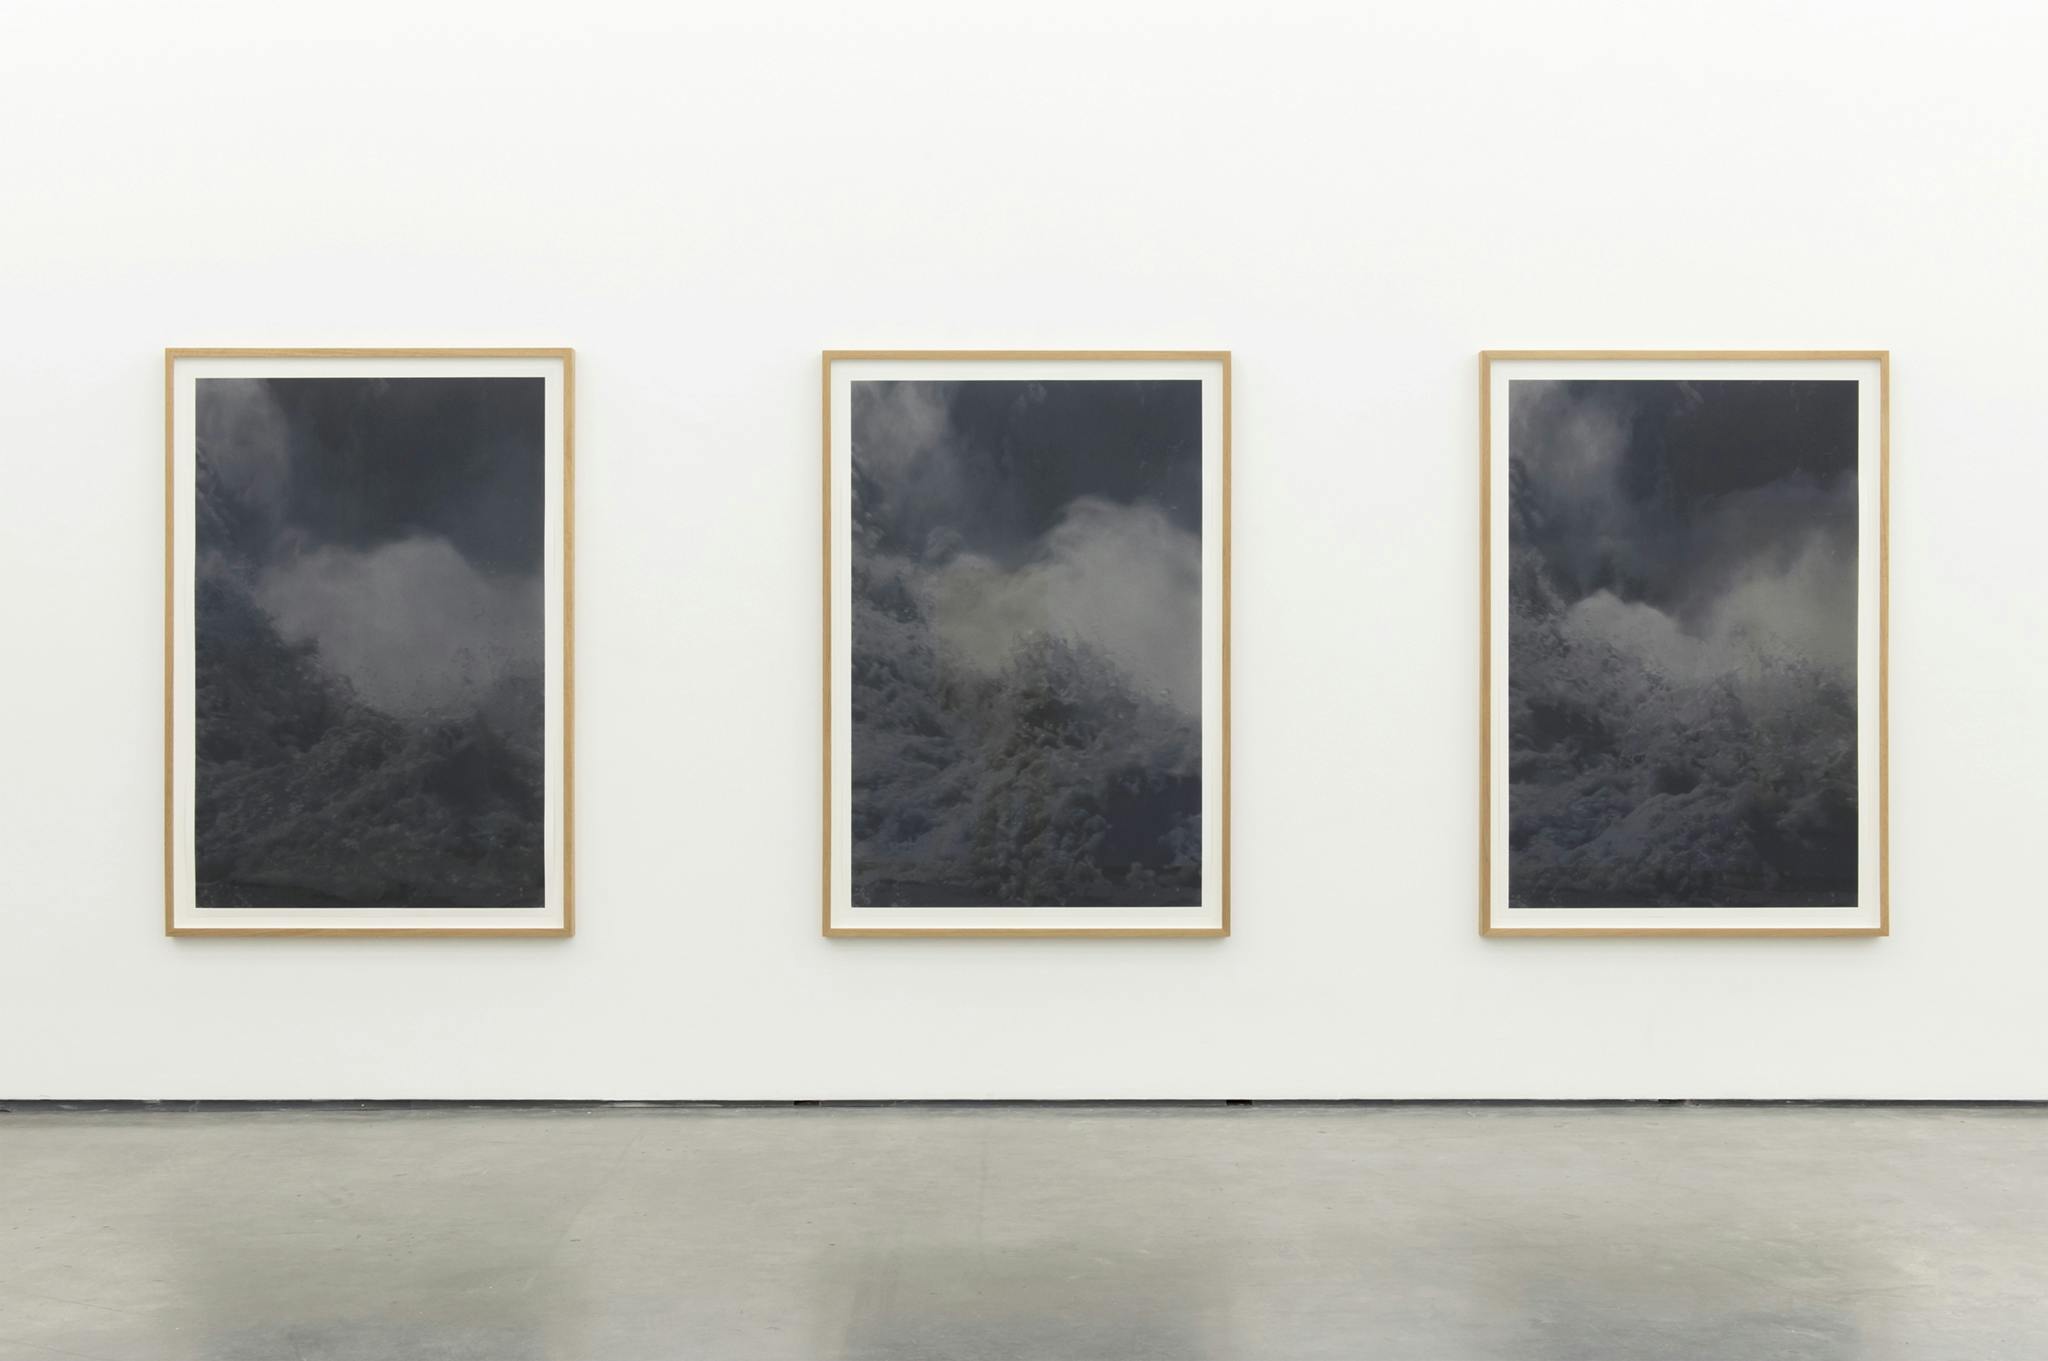 Three large-scale framed photographs hang on the wall of a gallery space. Frothing water is visible in the low-contrast, blue-grey toned images. 